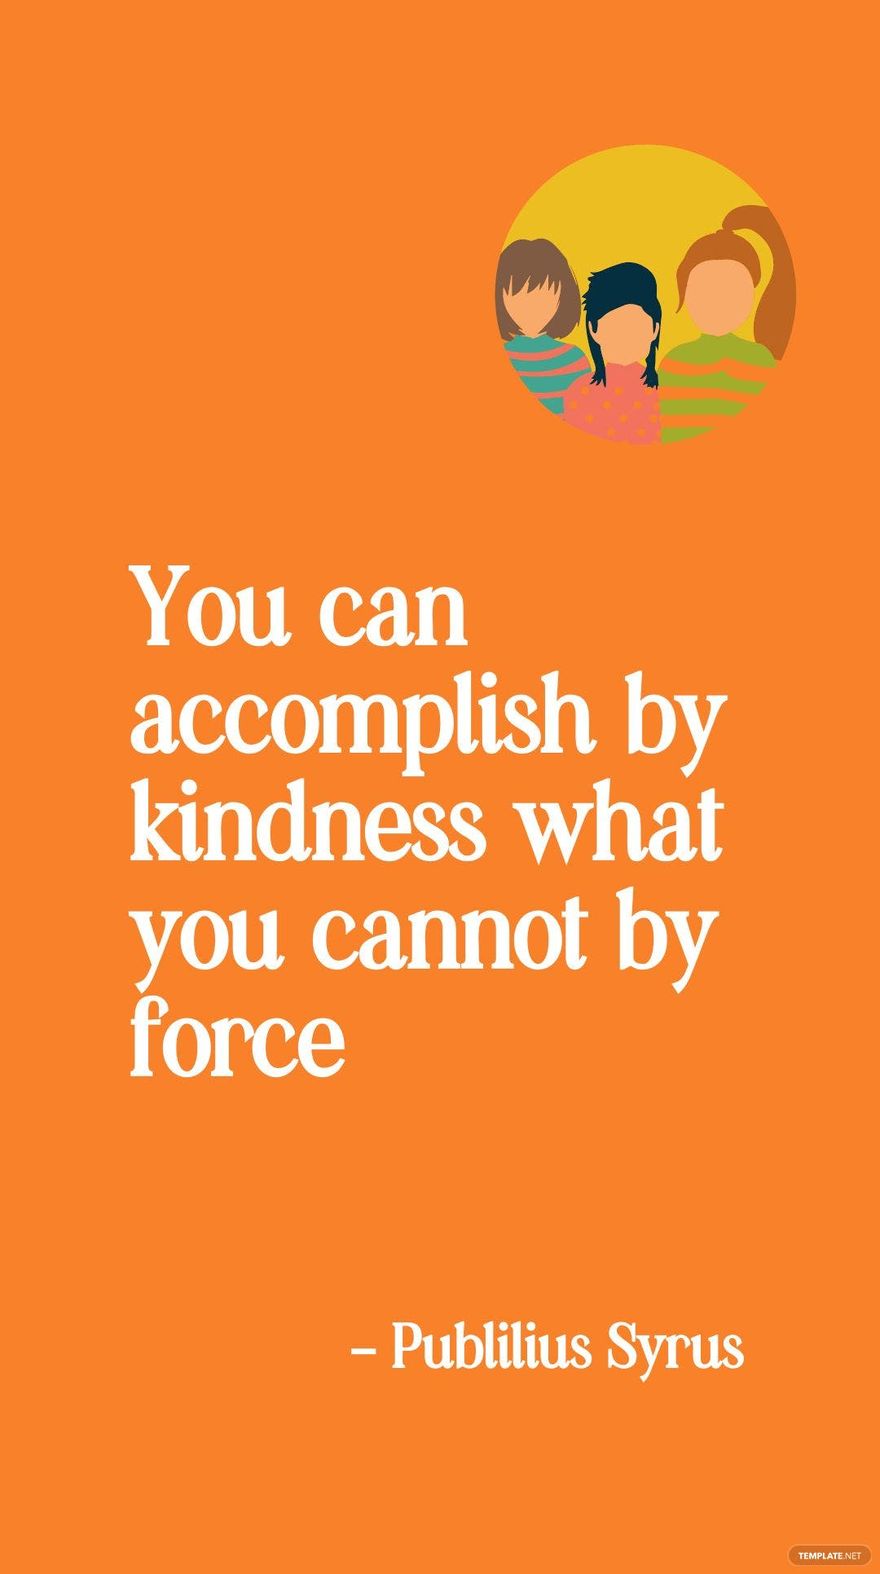 Publilius Syrus - You can accomplish by kindness what you cannot by force in JPG